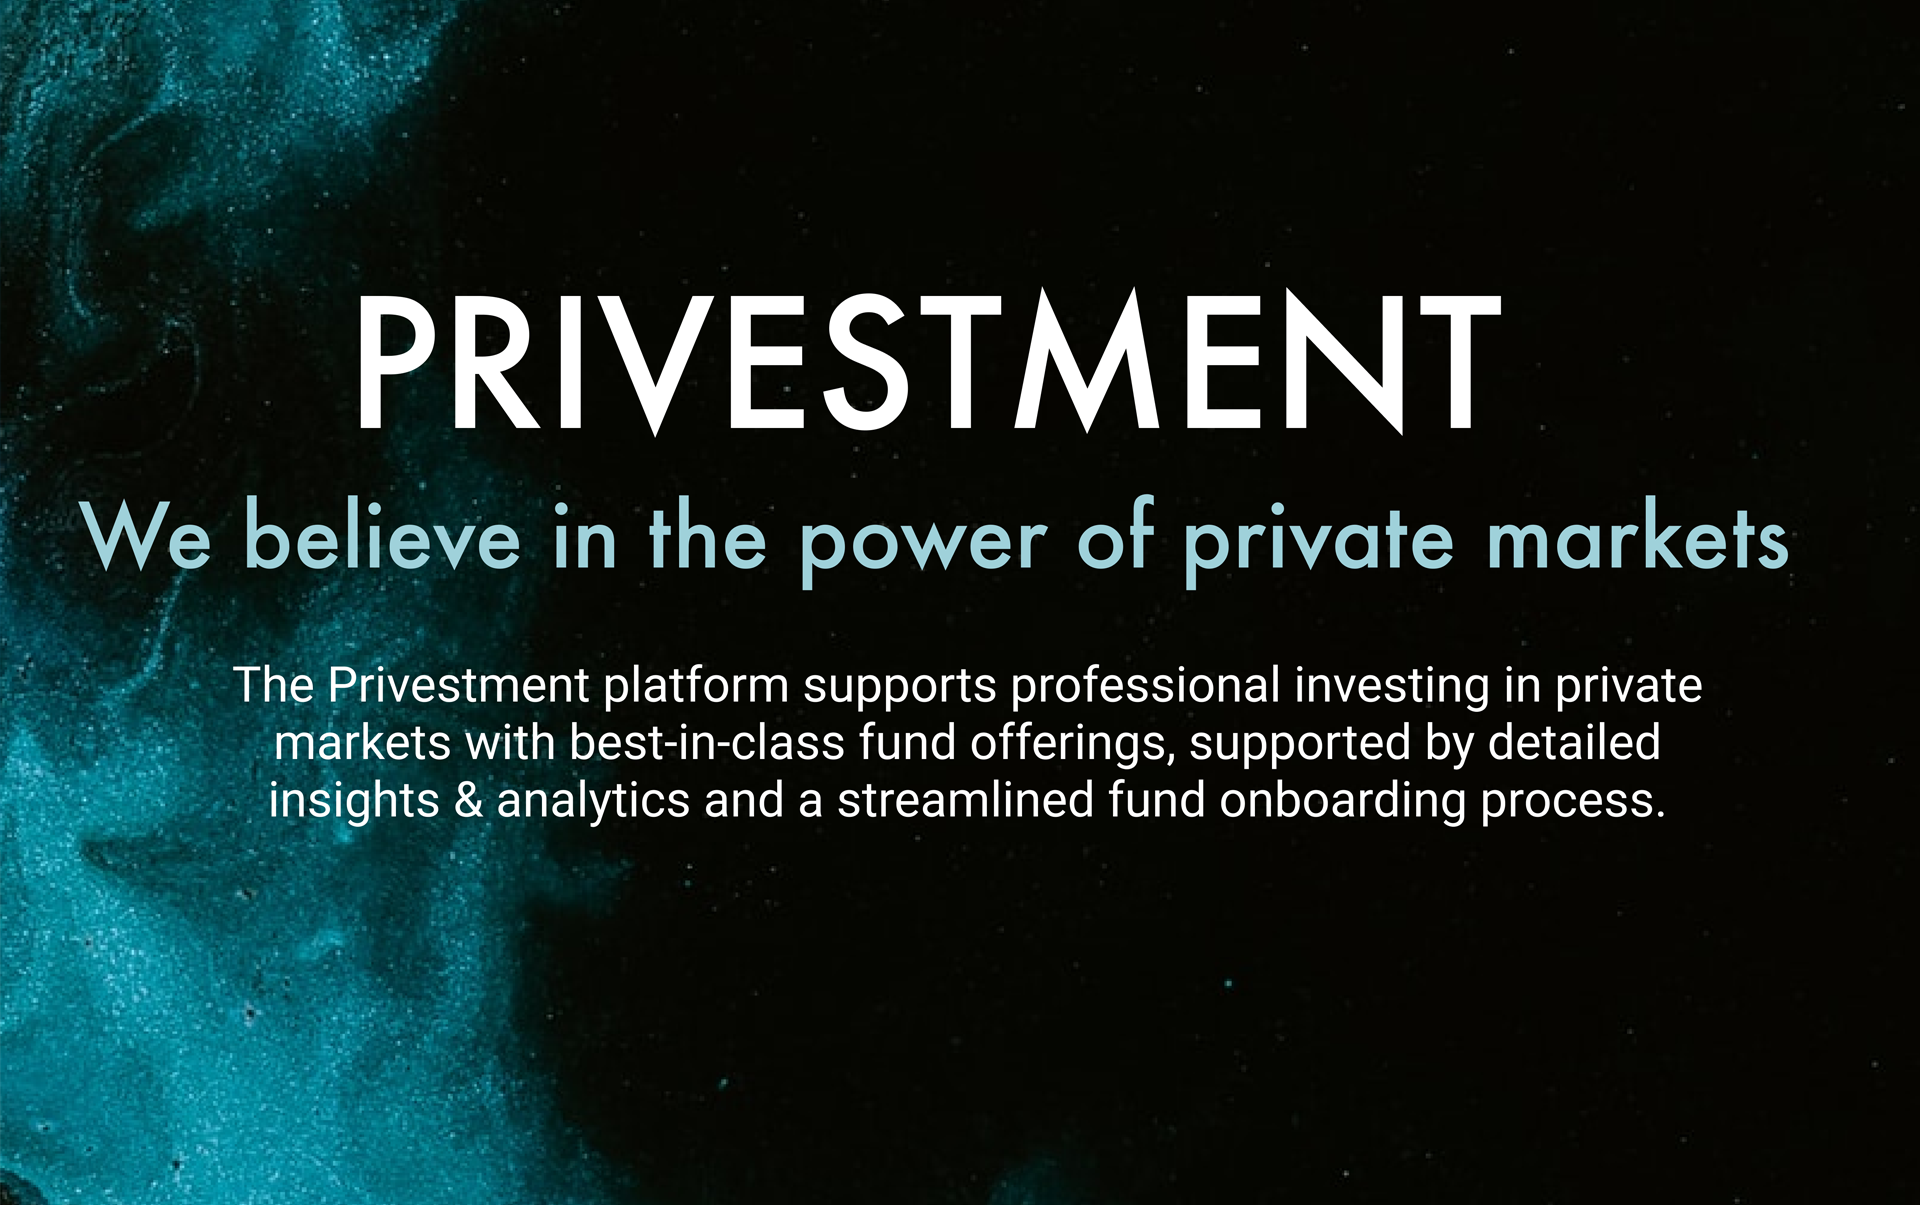 Privestment is a UX/UI design project and this is its presentation image.